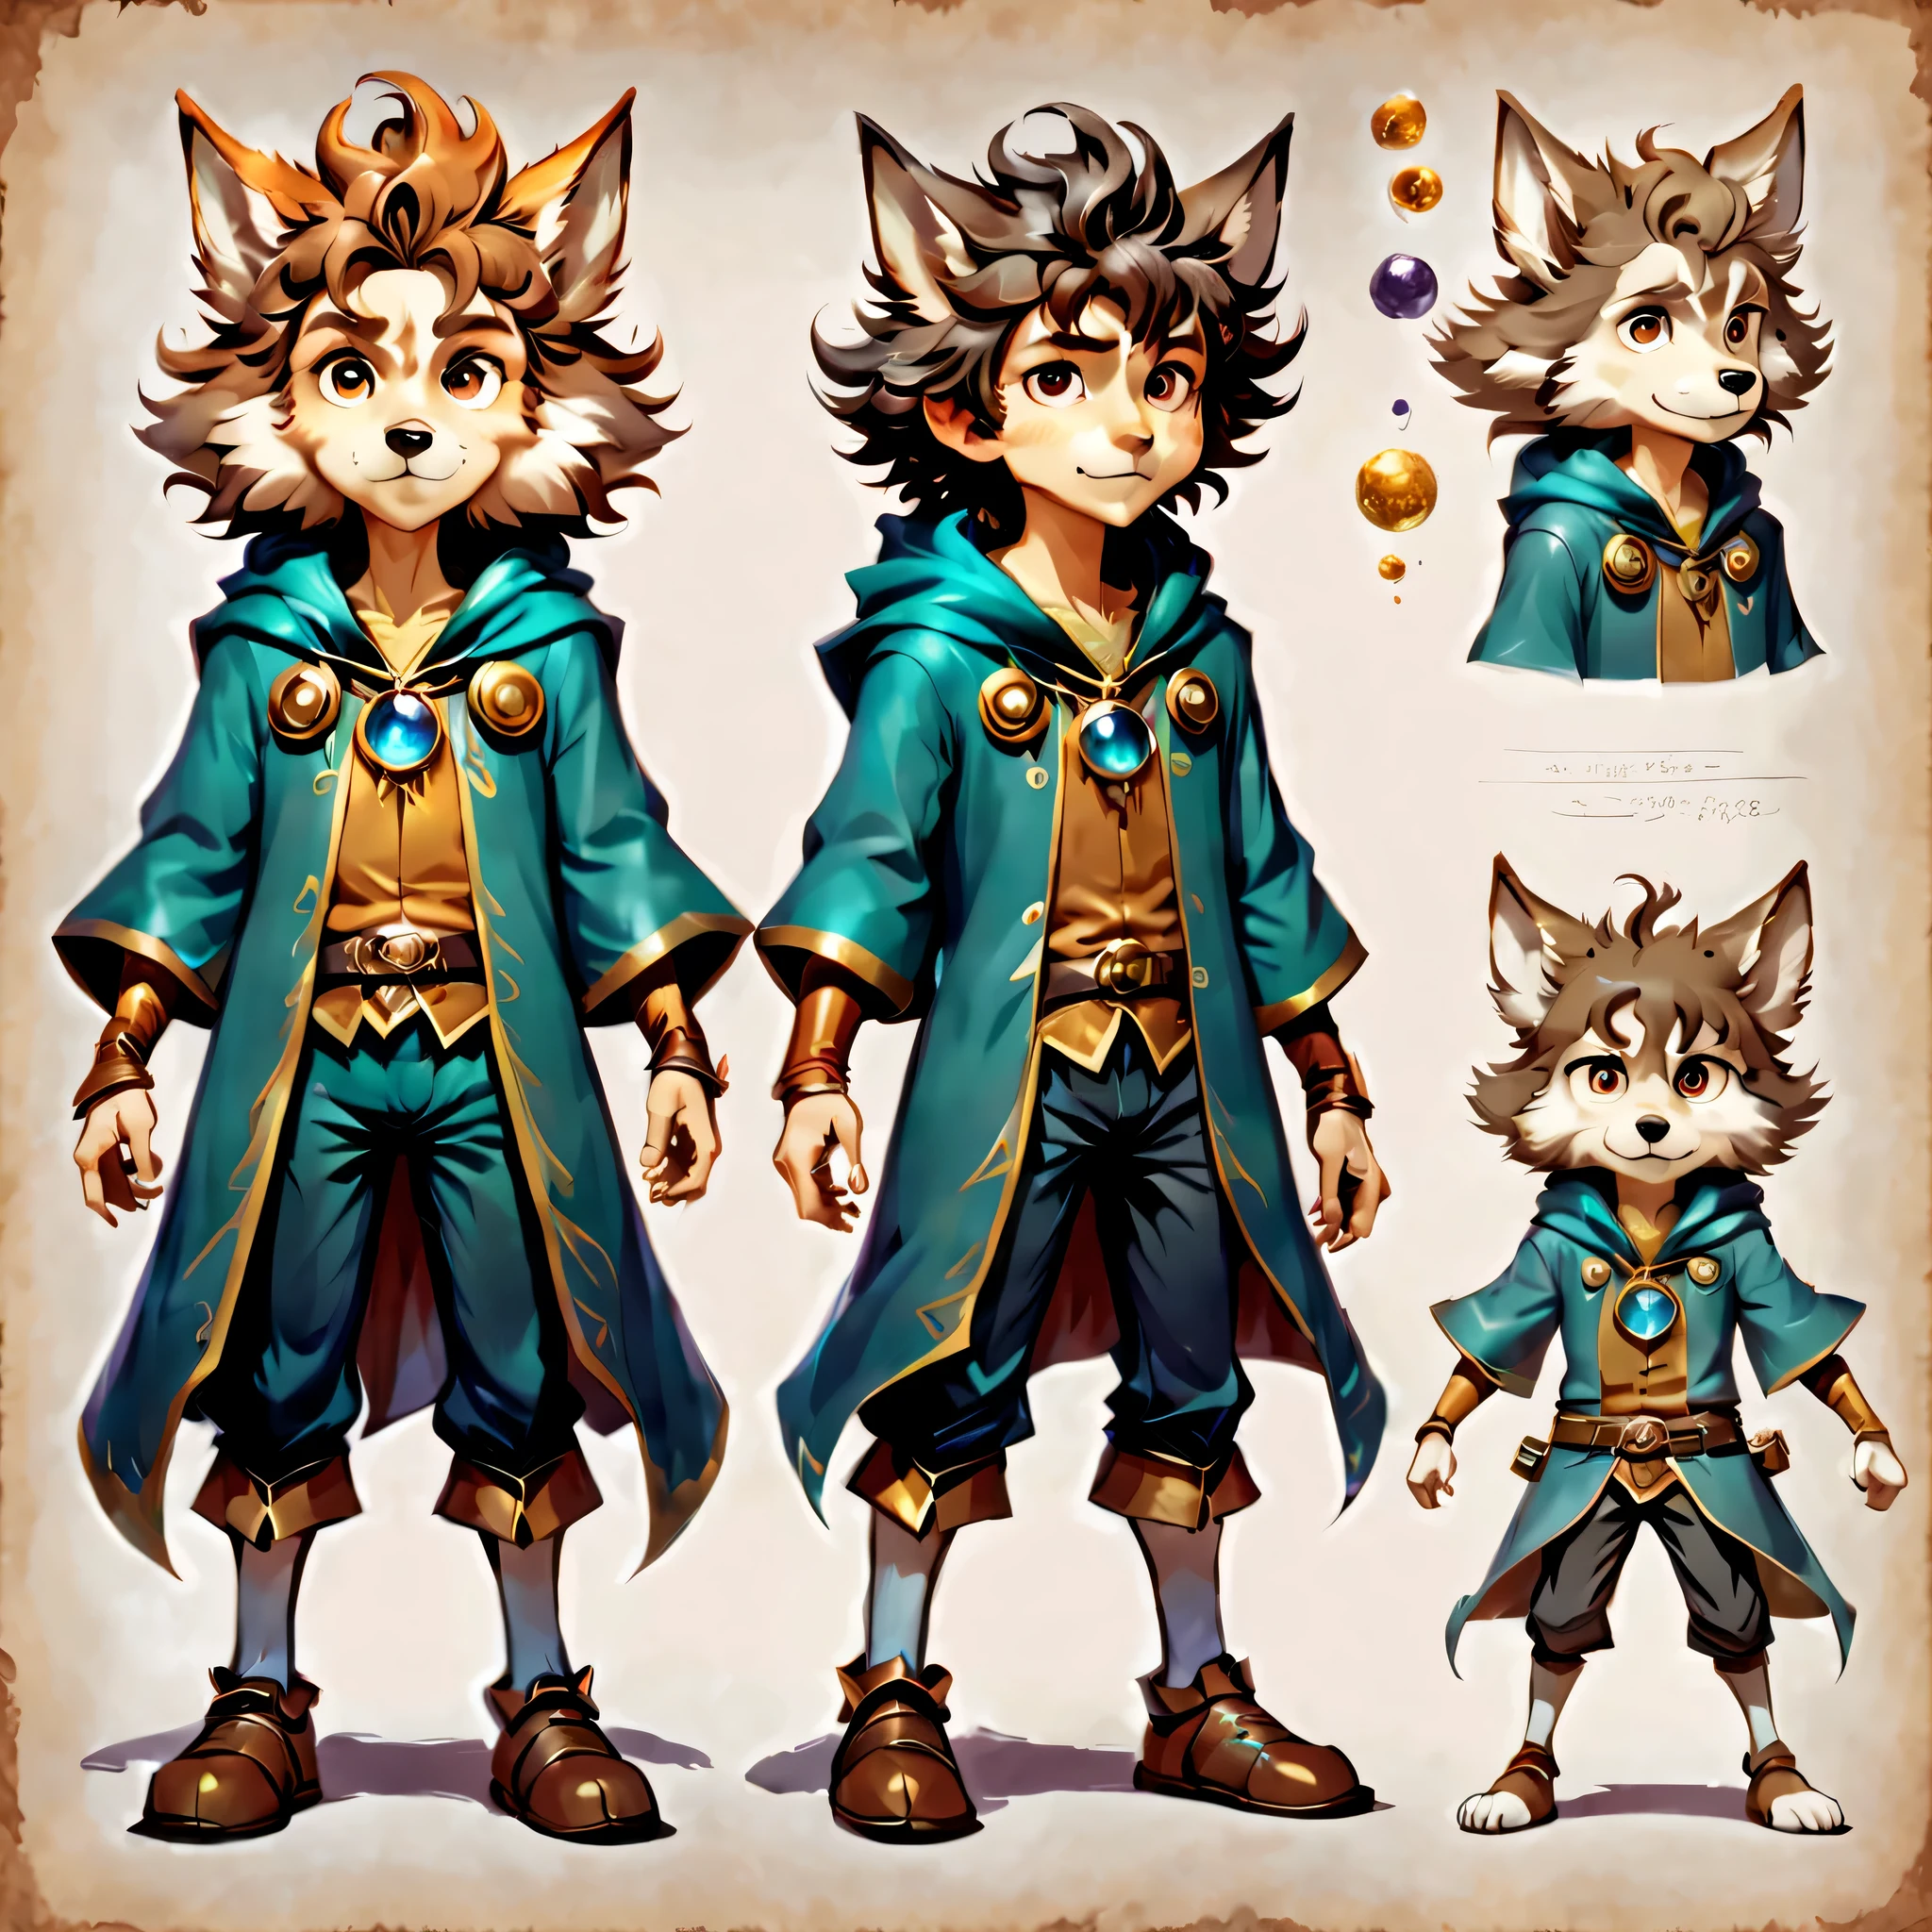 Create an original character design sheet,anime main character,boy,wizard,natural perm,my partner is a wolf,((3 views,whole body, background,multiple views,High resolution)),be familiar with,multiple views,Active,action pose,dynamic,nice,cute,masterpiece,highest quality,In detail,gracefully,sketch,sketch,ラフsketch,propose